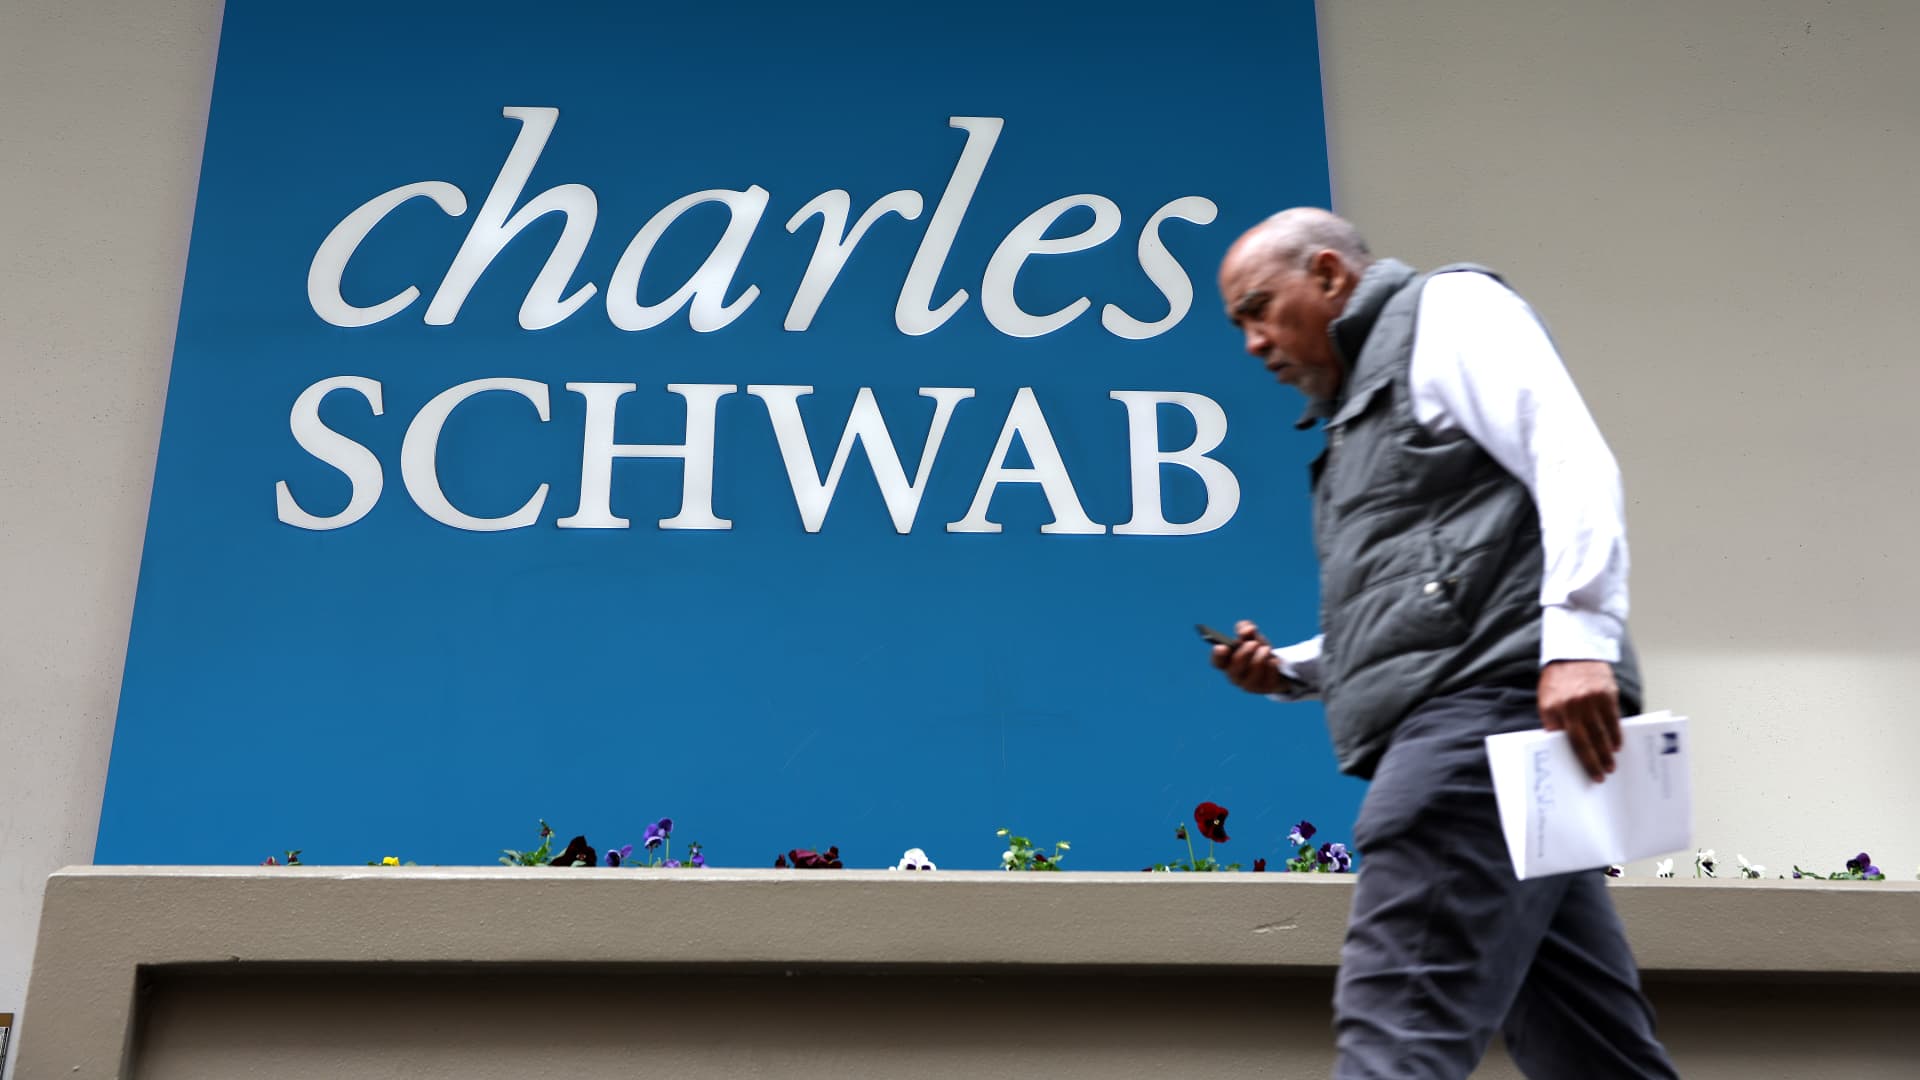 buy-charles-schwab-shares-to-ride-out-potential-summer-volatility-deutsche-bank-says